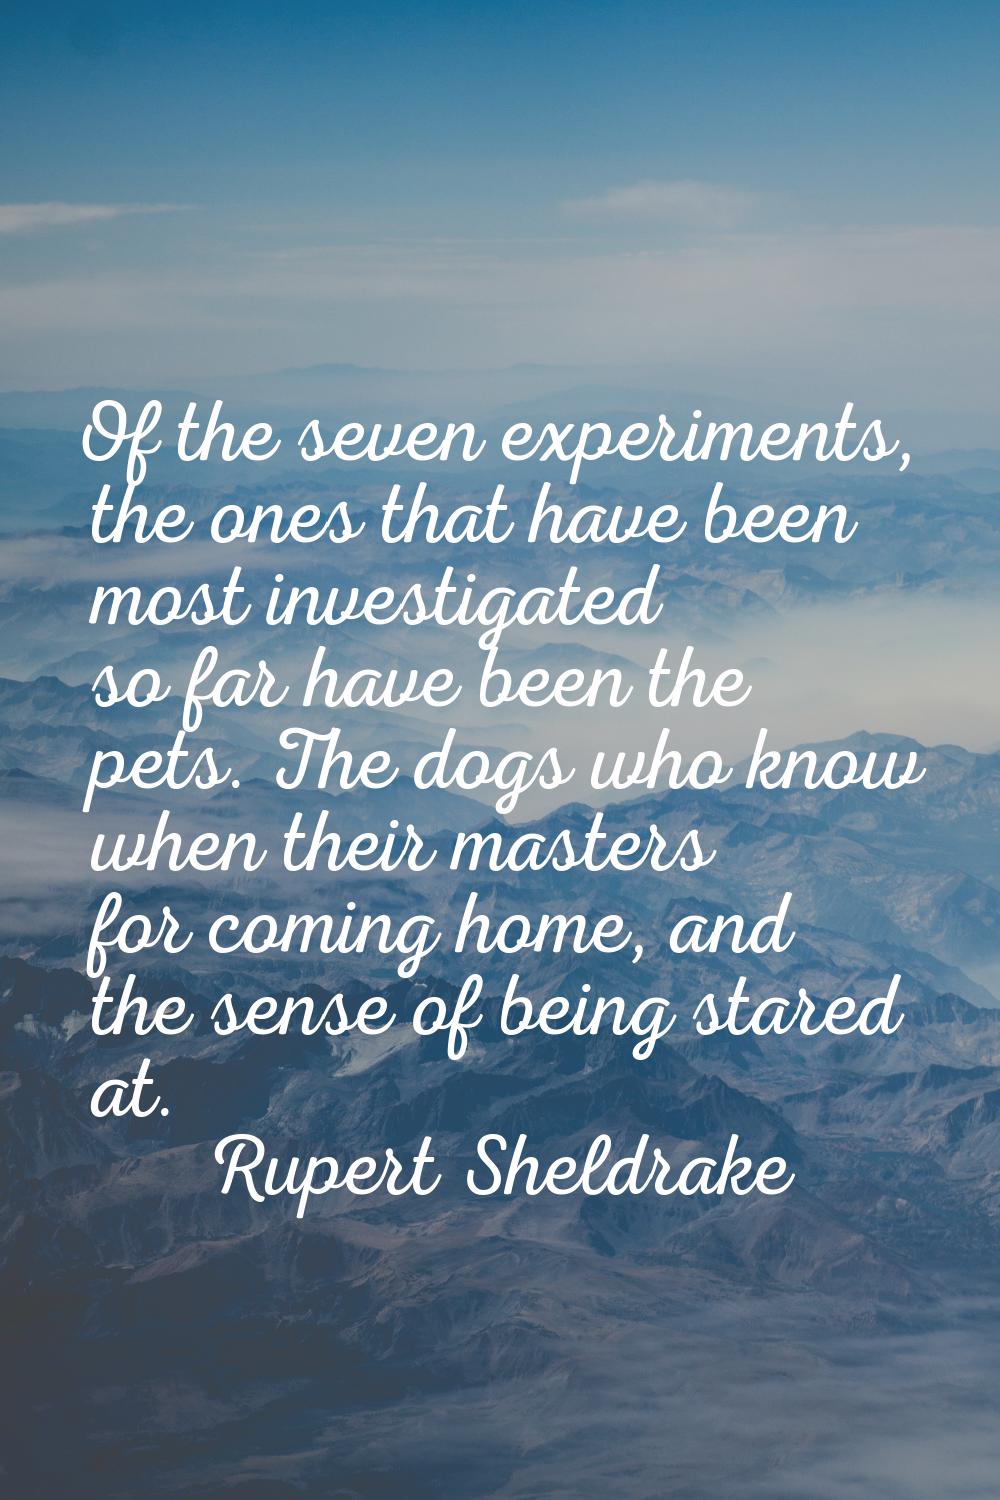 Of the seven experiments, the ones that have been most investigated so far have been the pets. The 